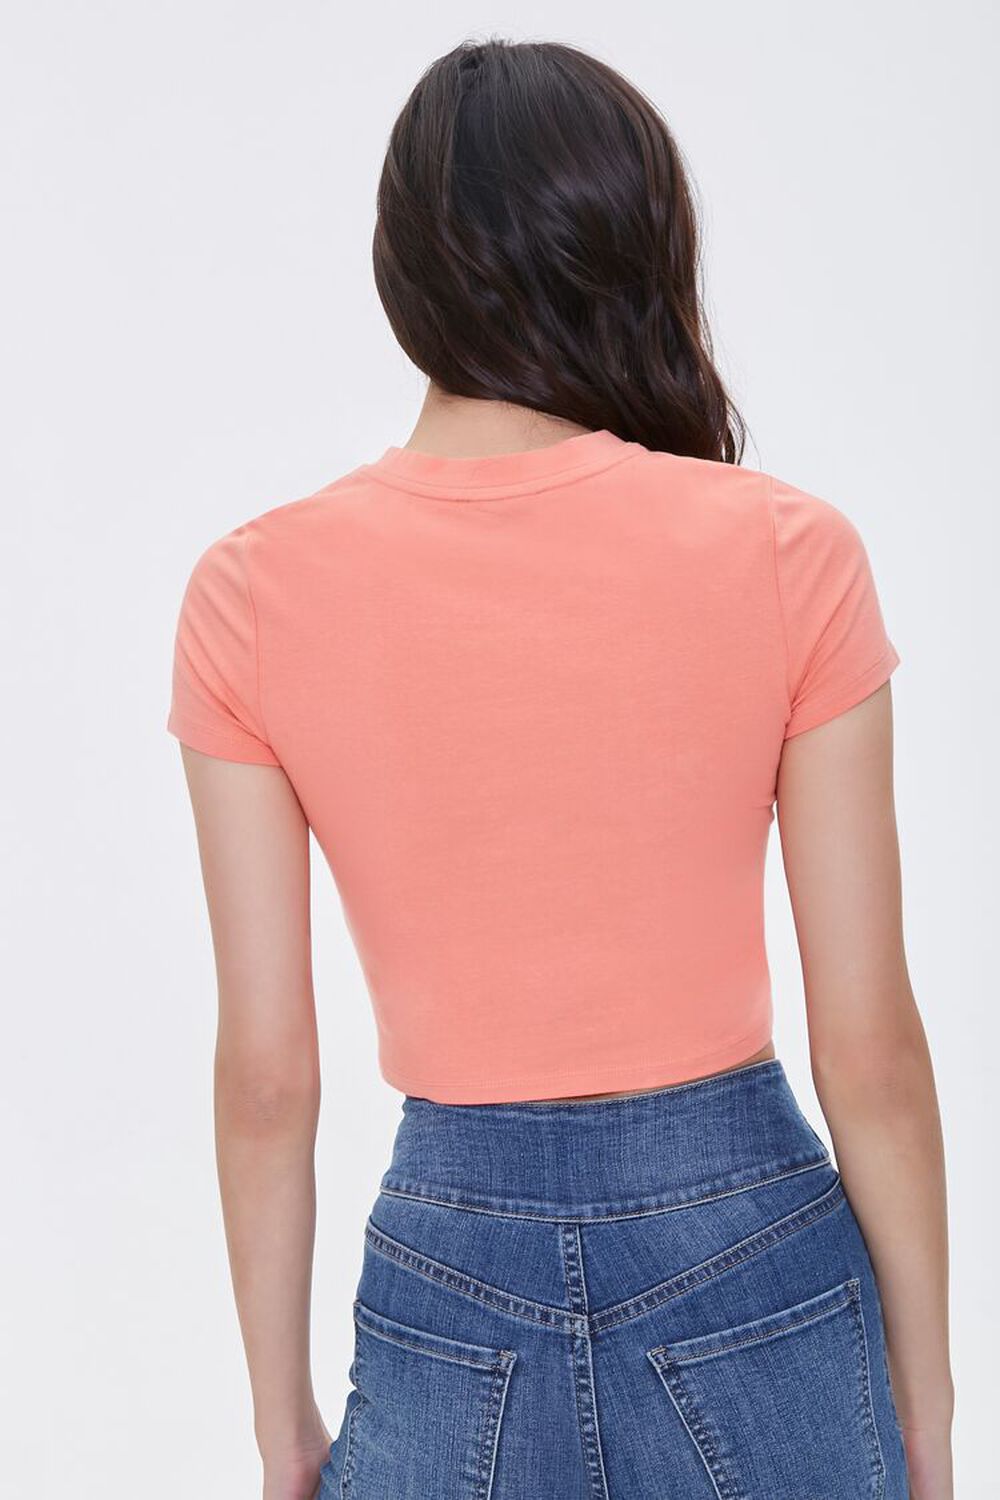 CORAL/MULTI Sun Child Cropped Tee, image 3